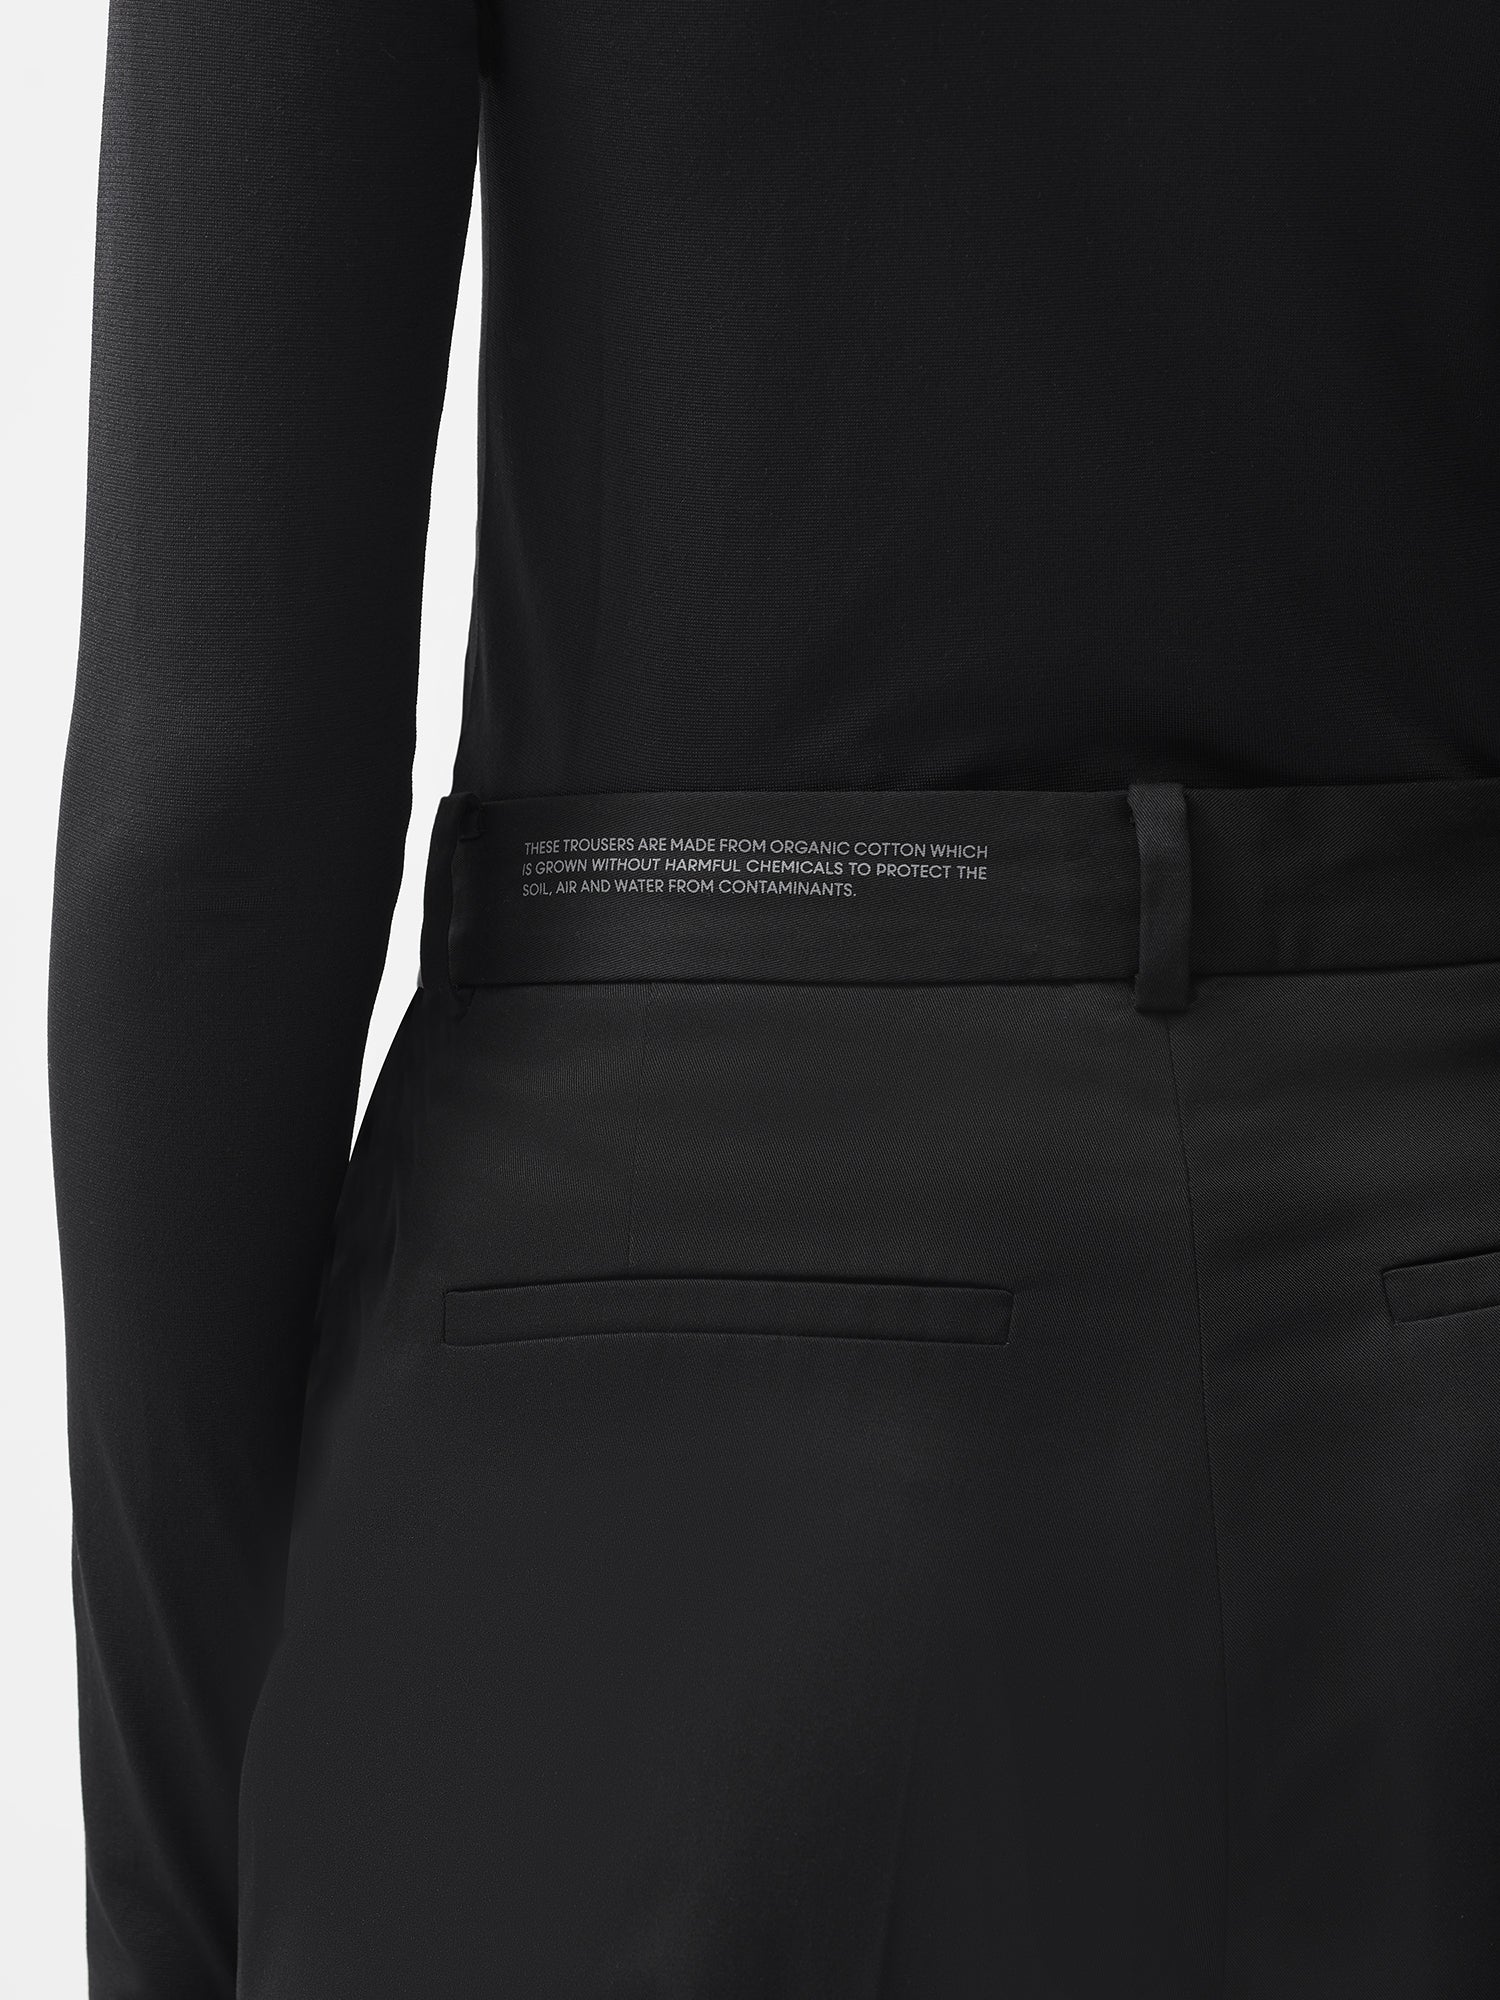 Black Tailored Trousers by Esse Studios on Sale